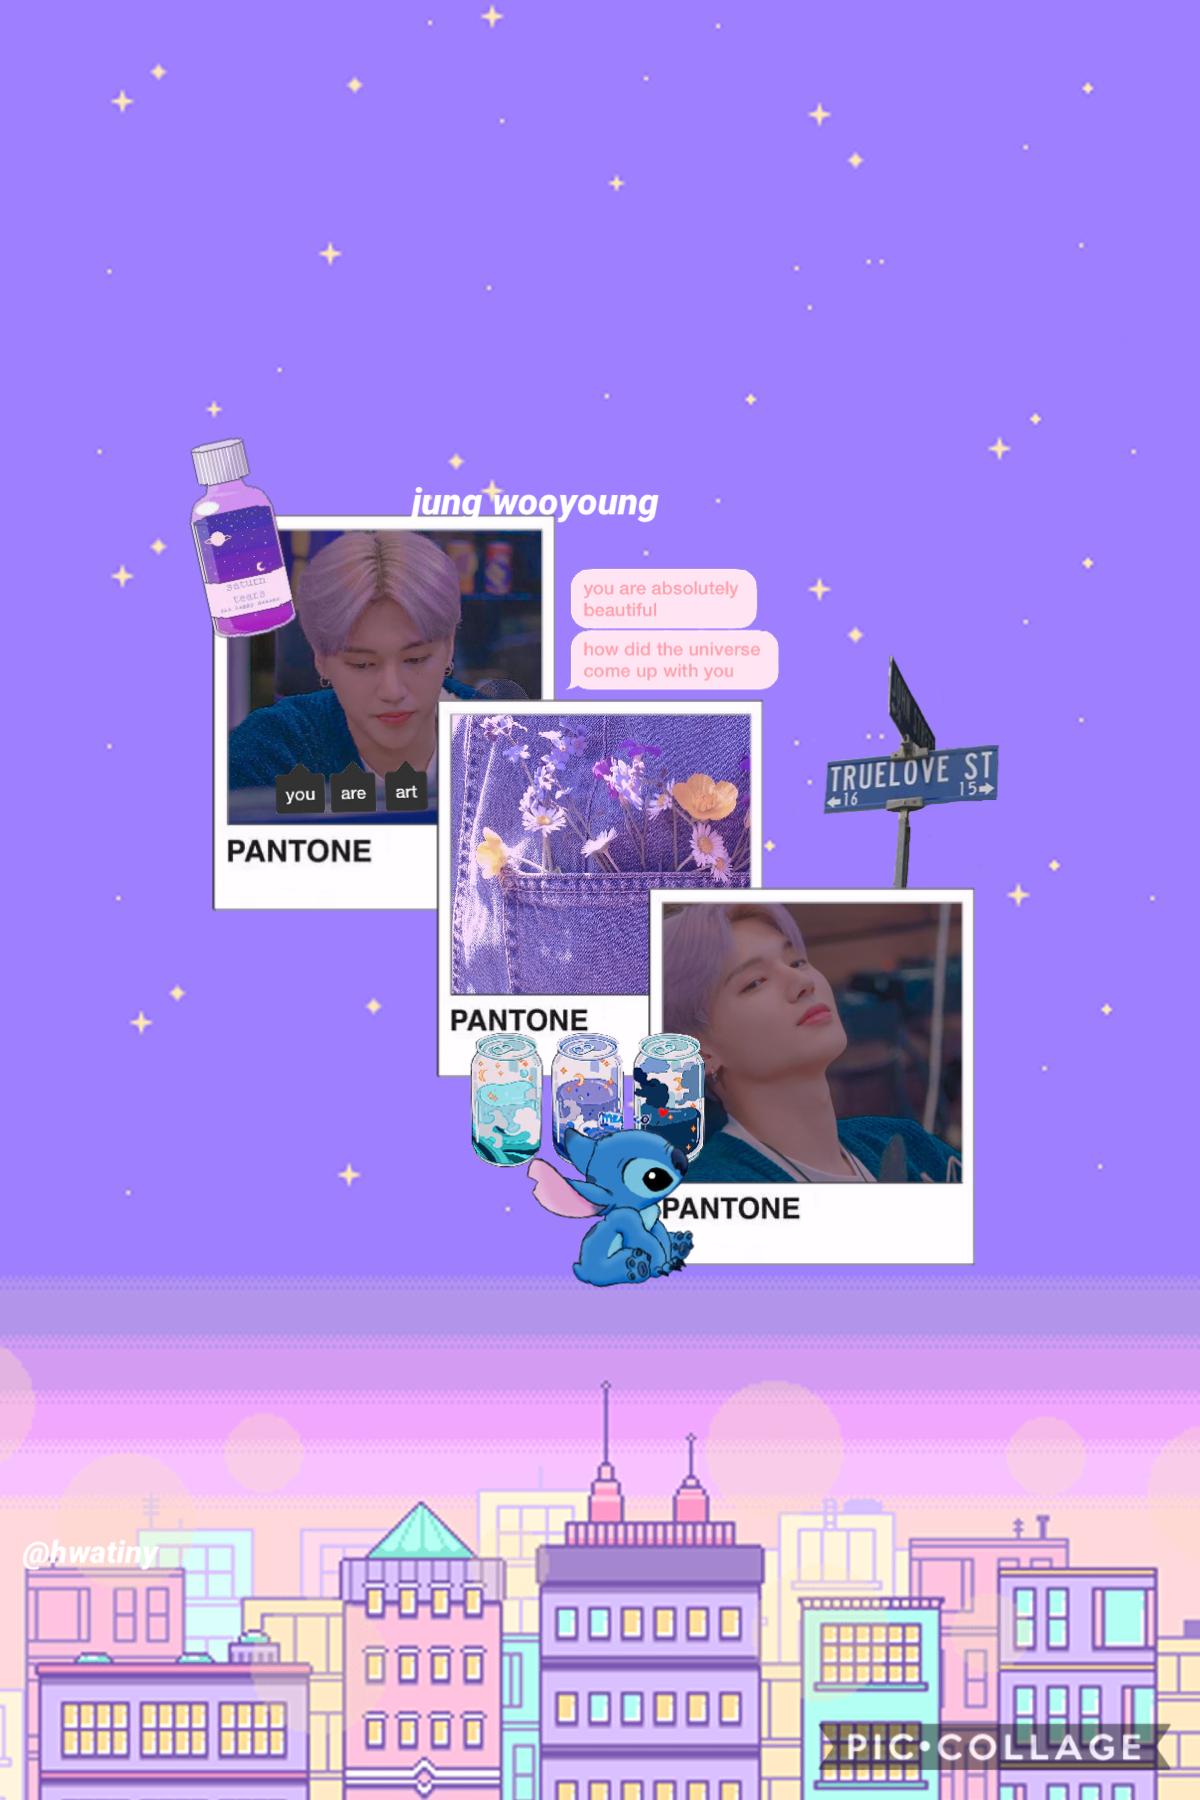 welcome to wooyoung's cafe, open up 🍵
ok today i think the world said 'today is a good day for you' cos this is one of the BEST collages i've made so far with my new style! god really playing favourites with ateez :')

one more song of the day: stay beaut